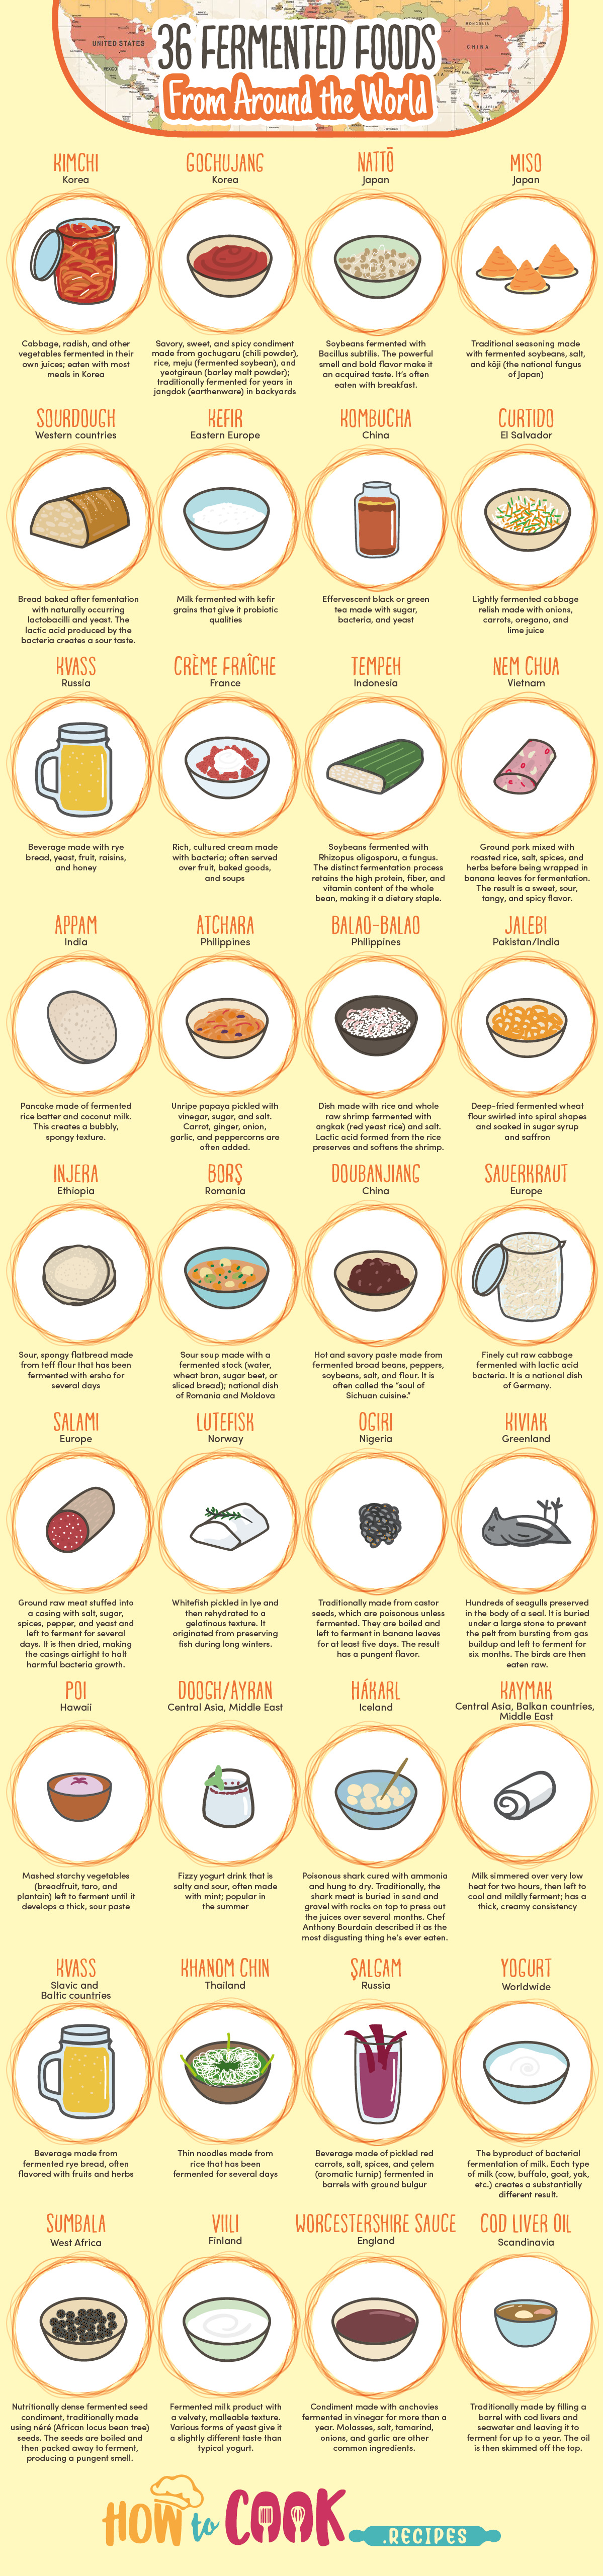 36 Fermented Foods From World How To